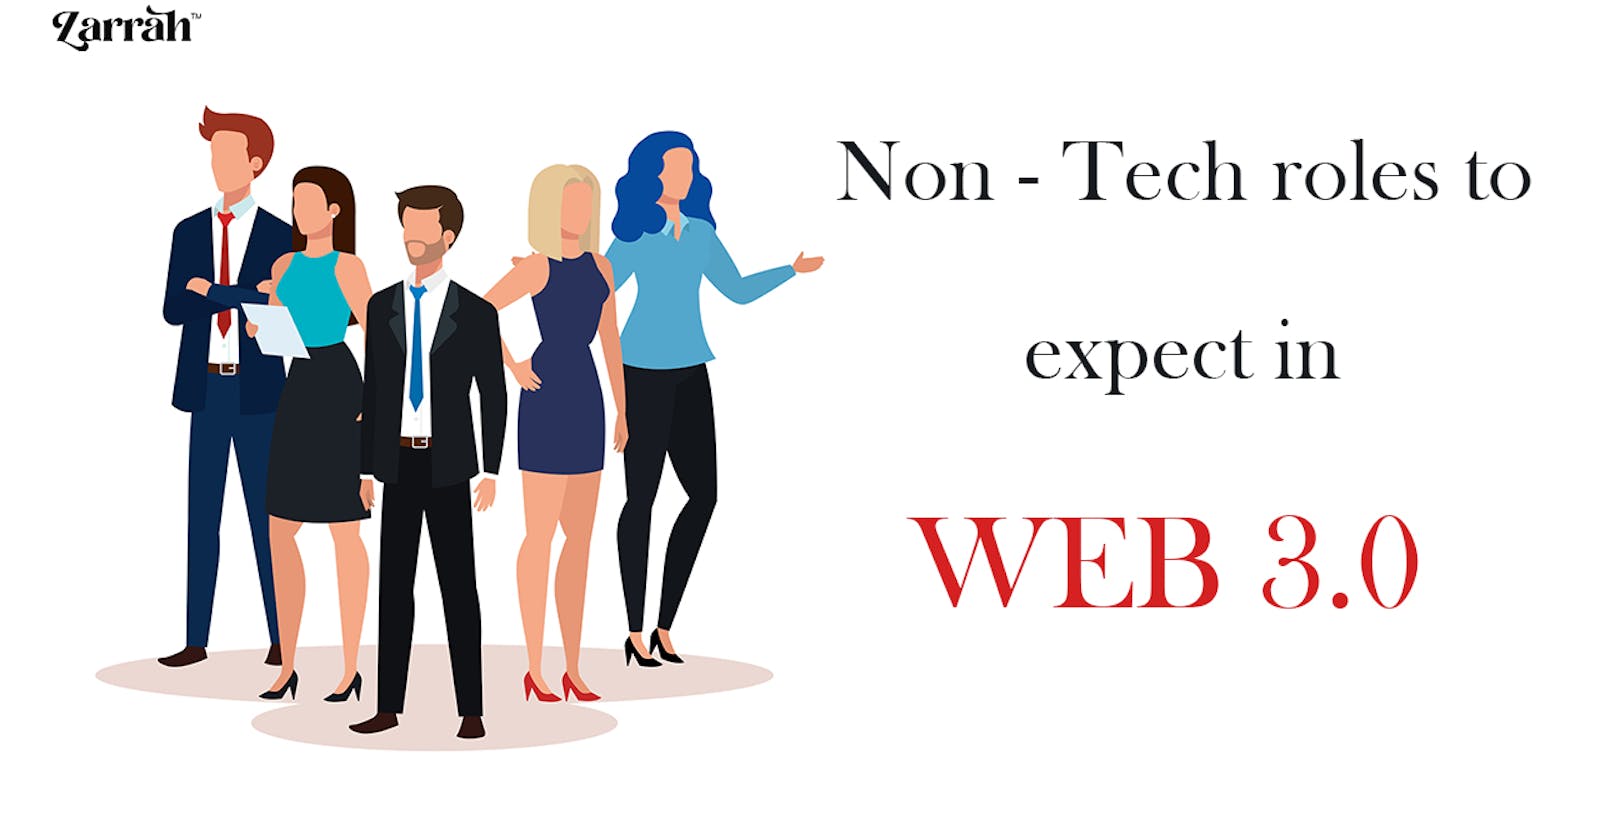 Non - Tech roles to expect in Web 3.0